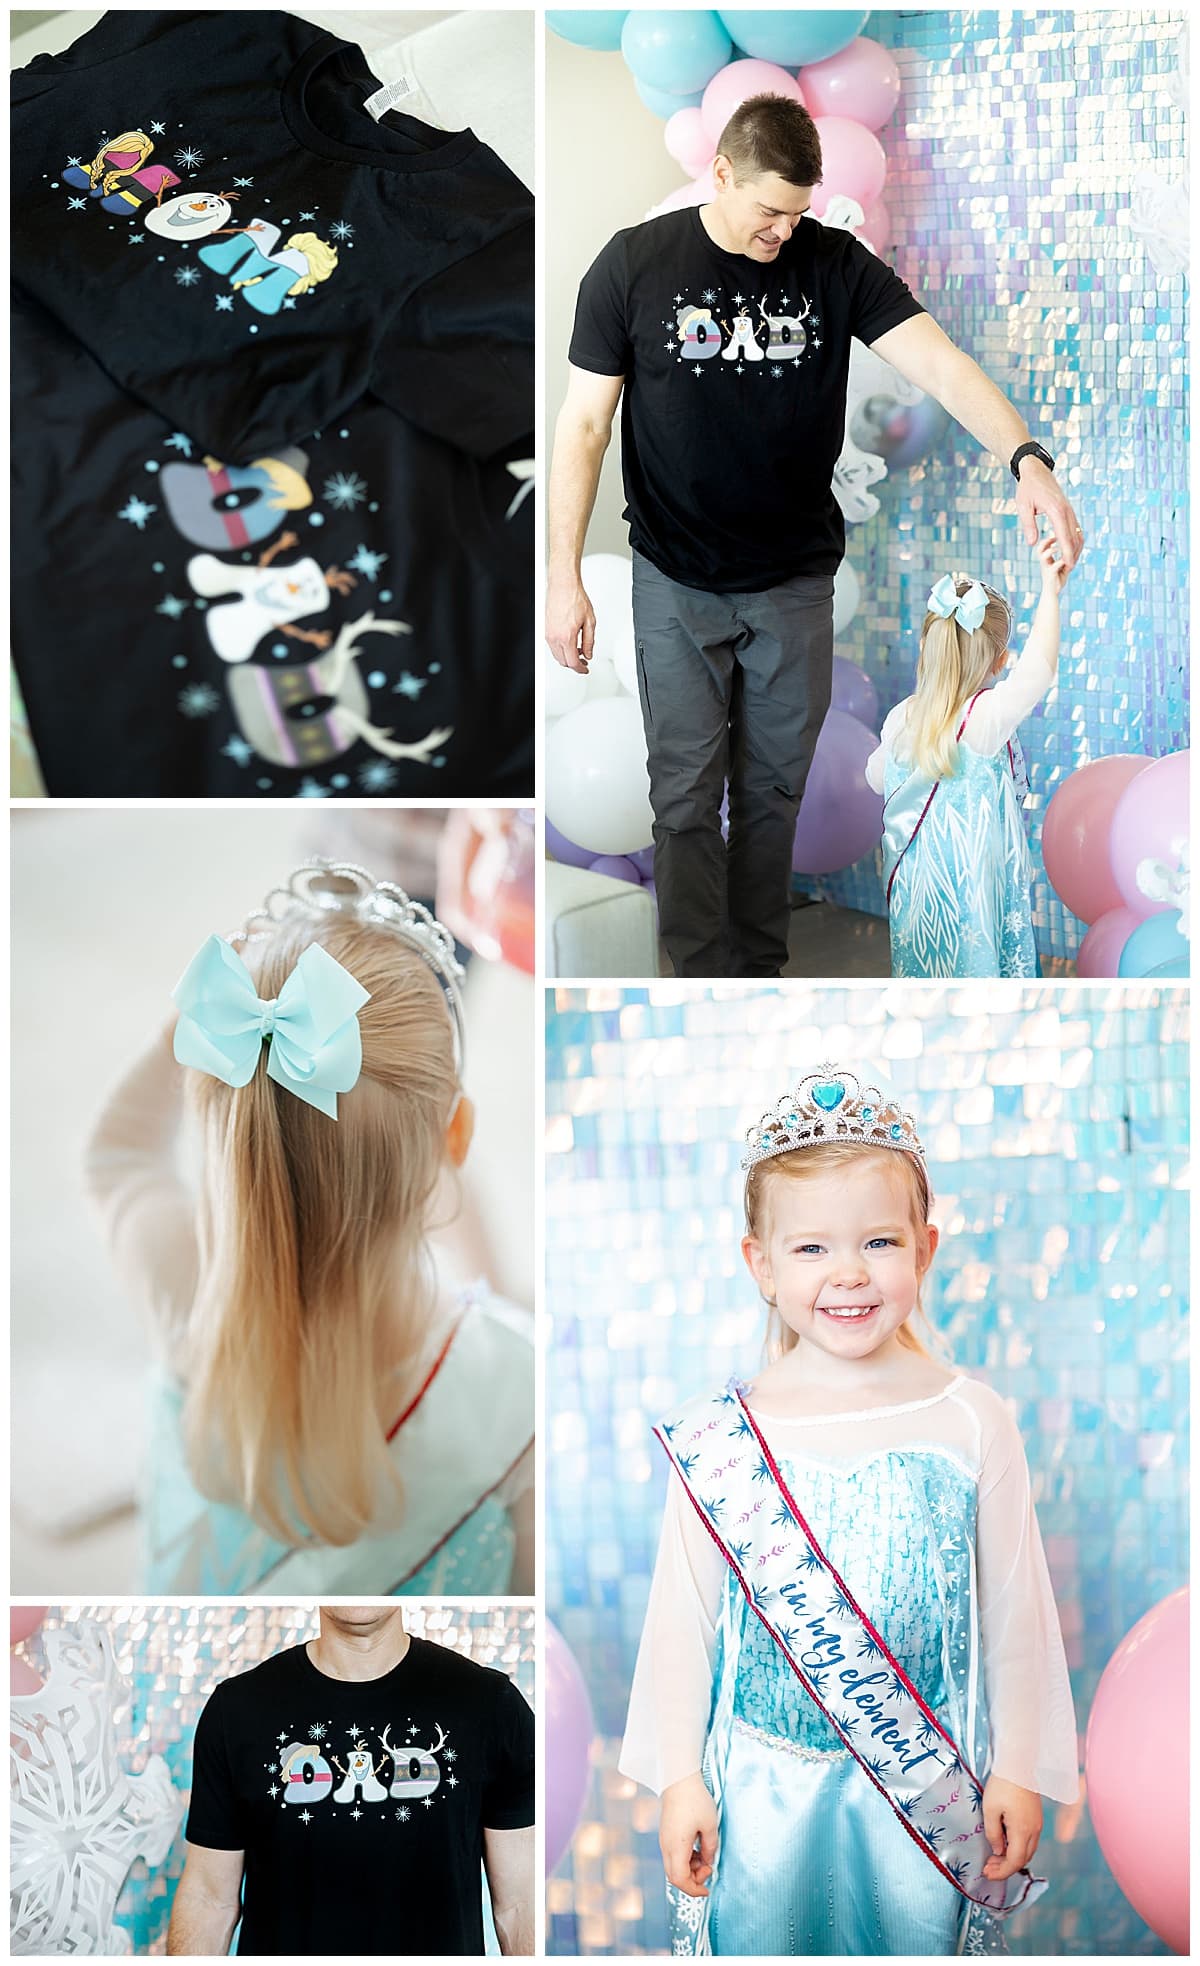 Collage of Frozen party attire at a 3 year old's birthday party